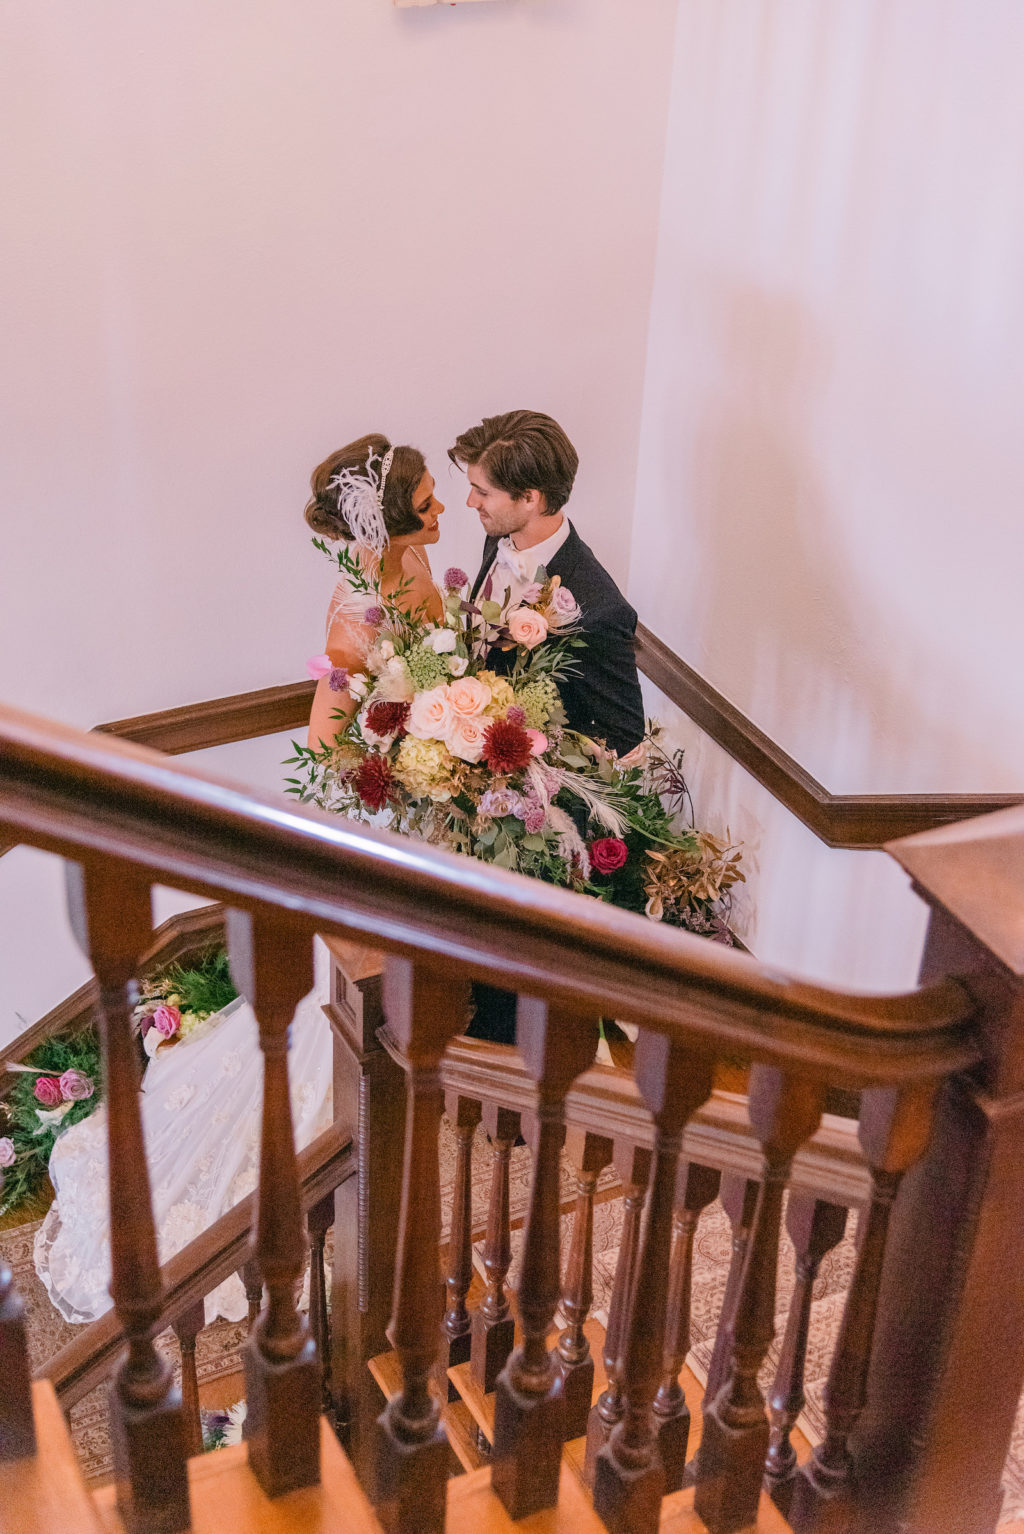 Romantic Bride and Groom Photo on Staircase Holding Whimsical Lush Jewel Toned Floral Bouquet | Tampa Bay Wedding Planner EventFull Weddings